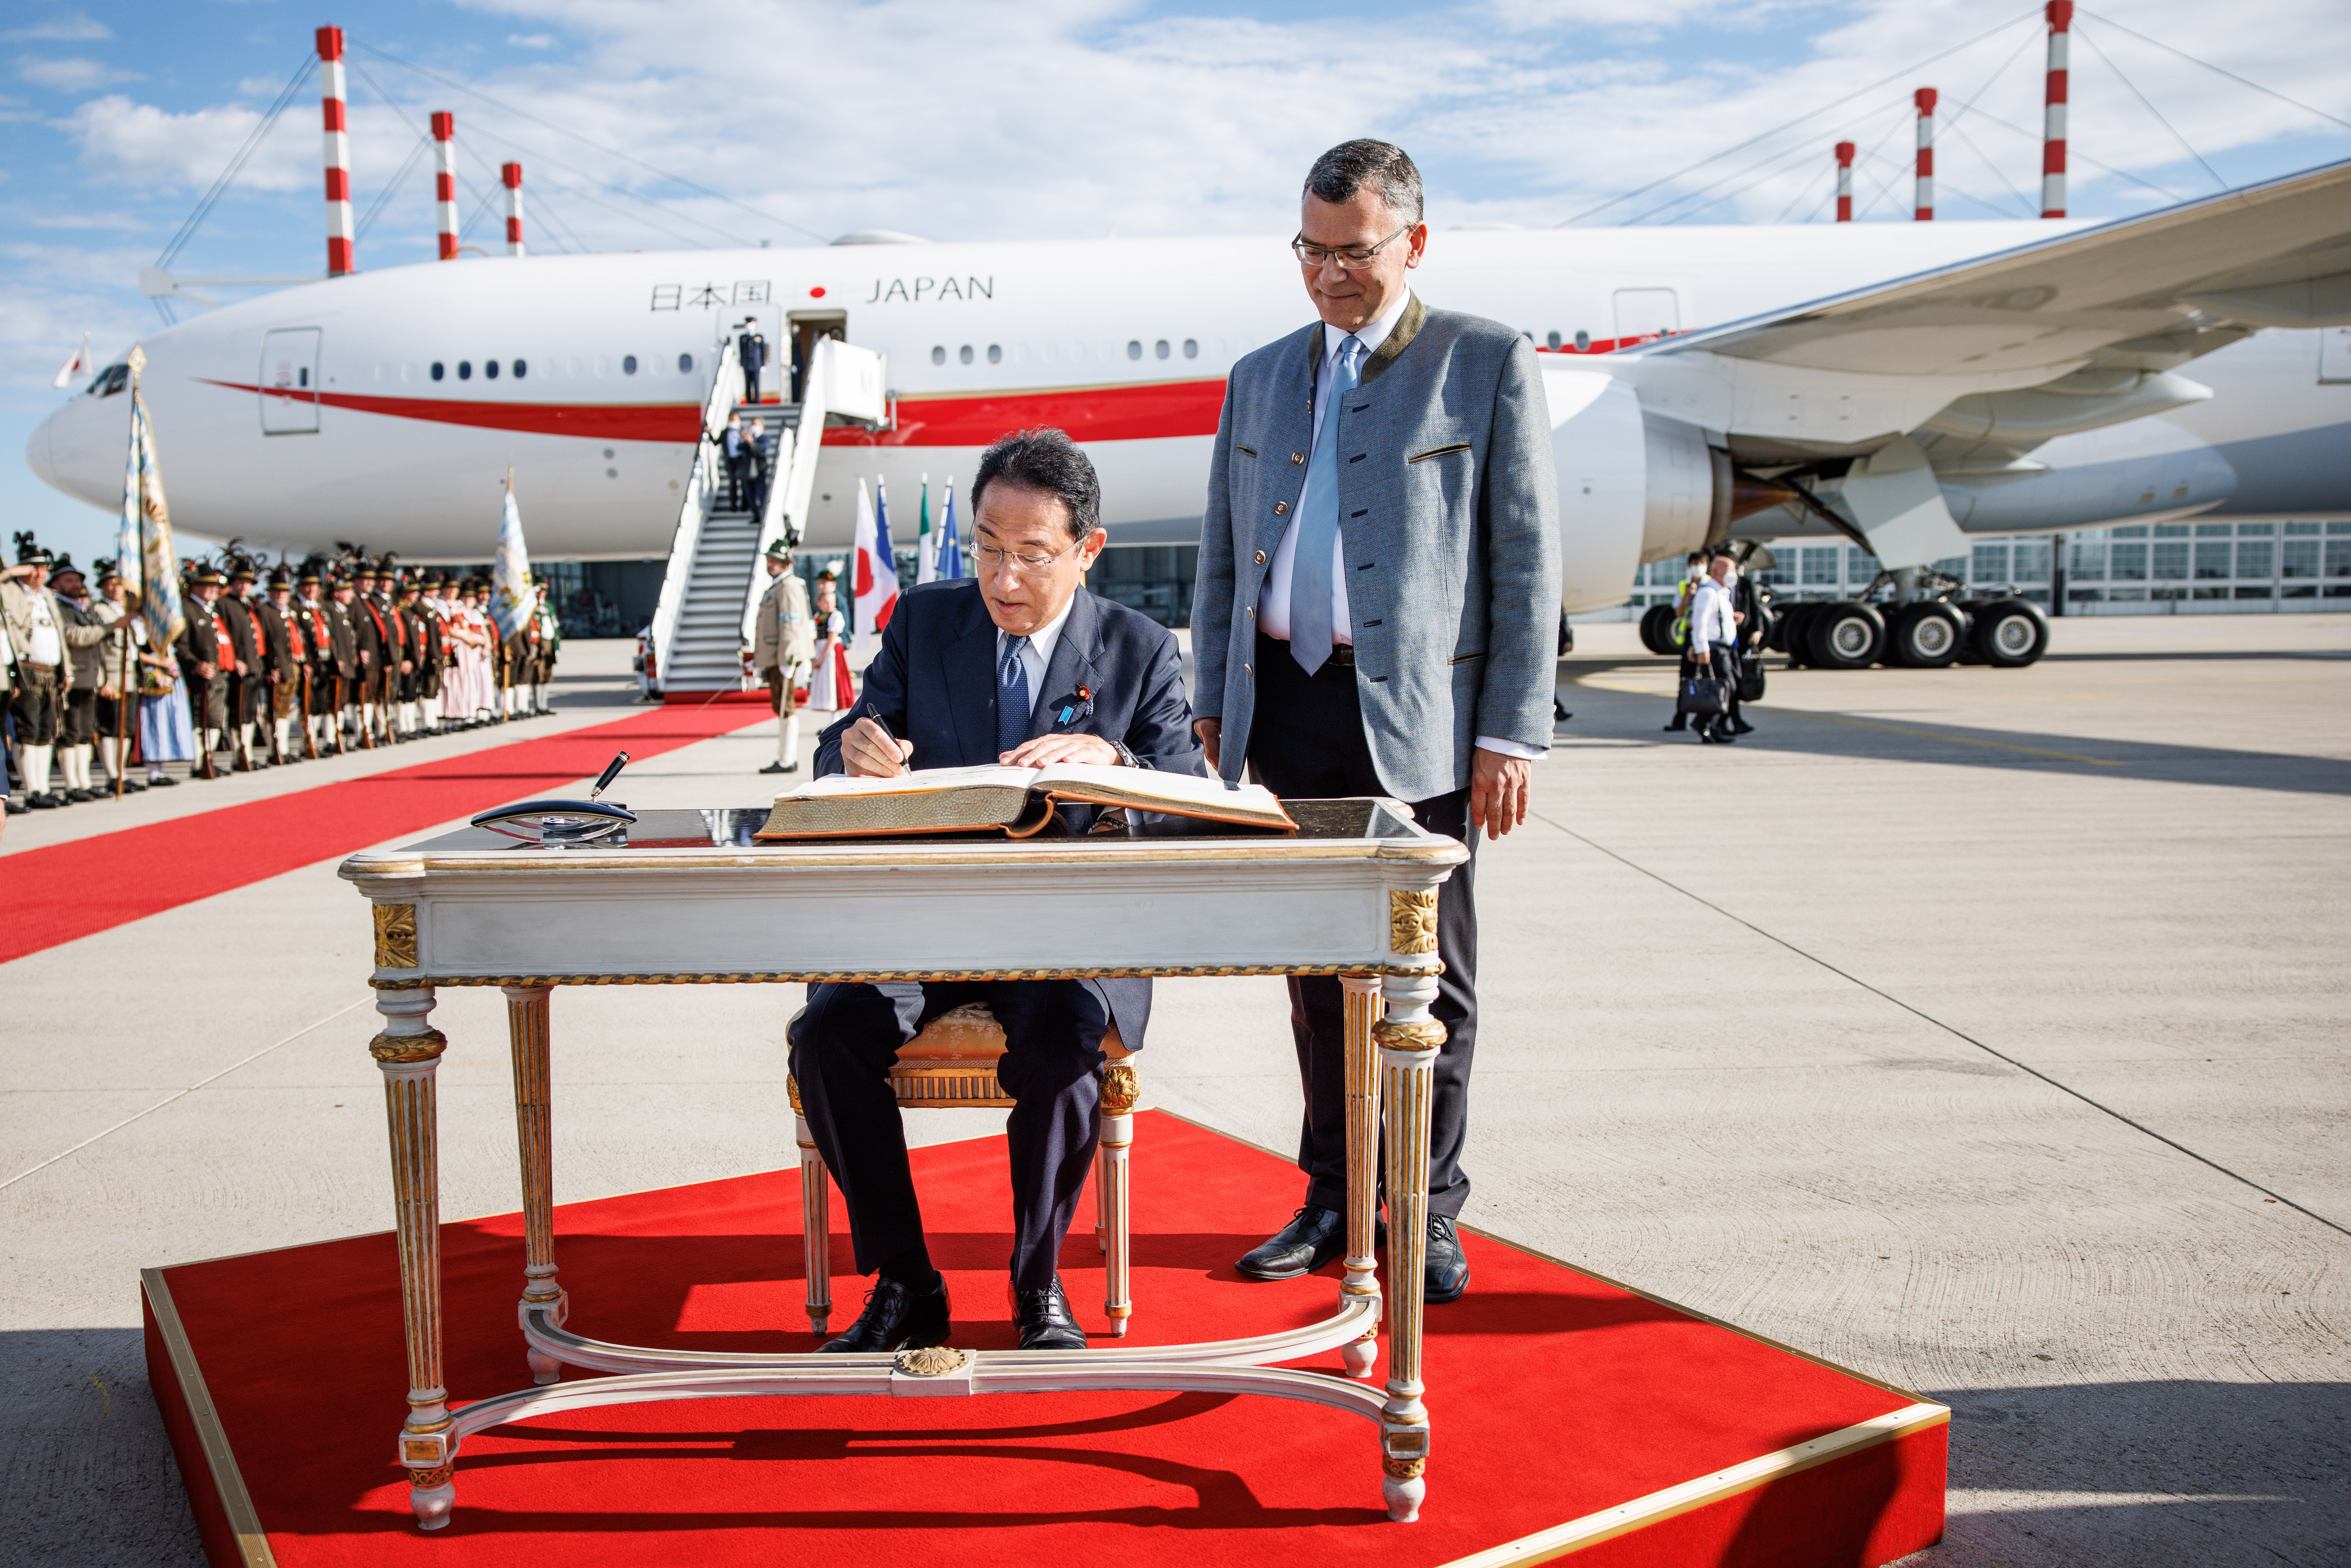 Arrival of Fumio Kishida (Prime Minister of Japan) at Munich Airport, welcome by Florian Herrmann, Head of the Bavarian State Chancellery, and signing of the golden visitors’ book of the Government of the Free State of Bavaria.